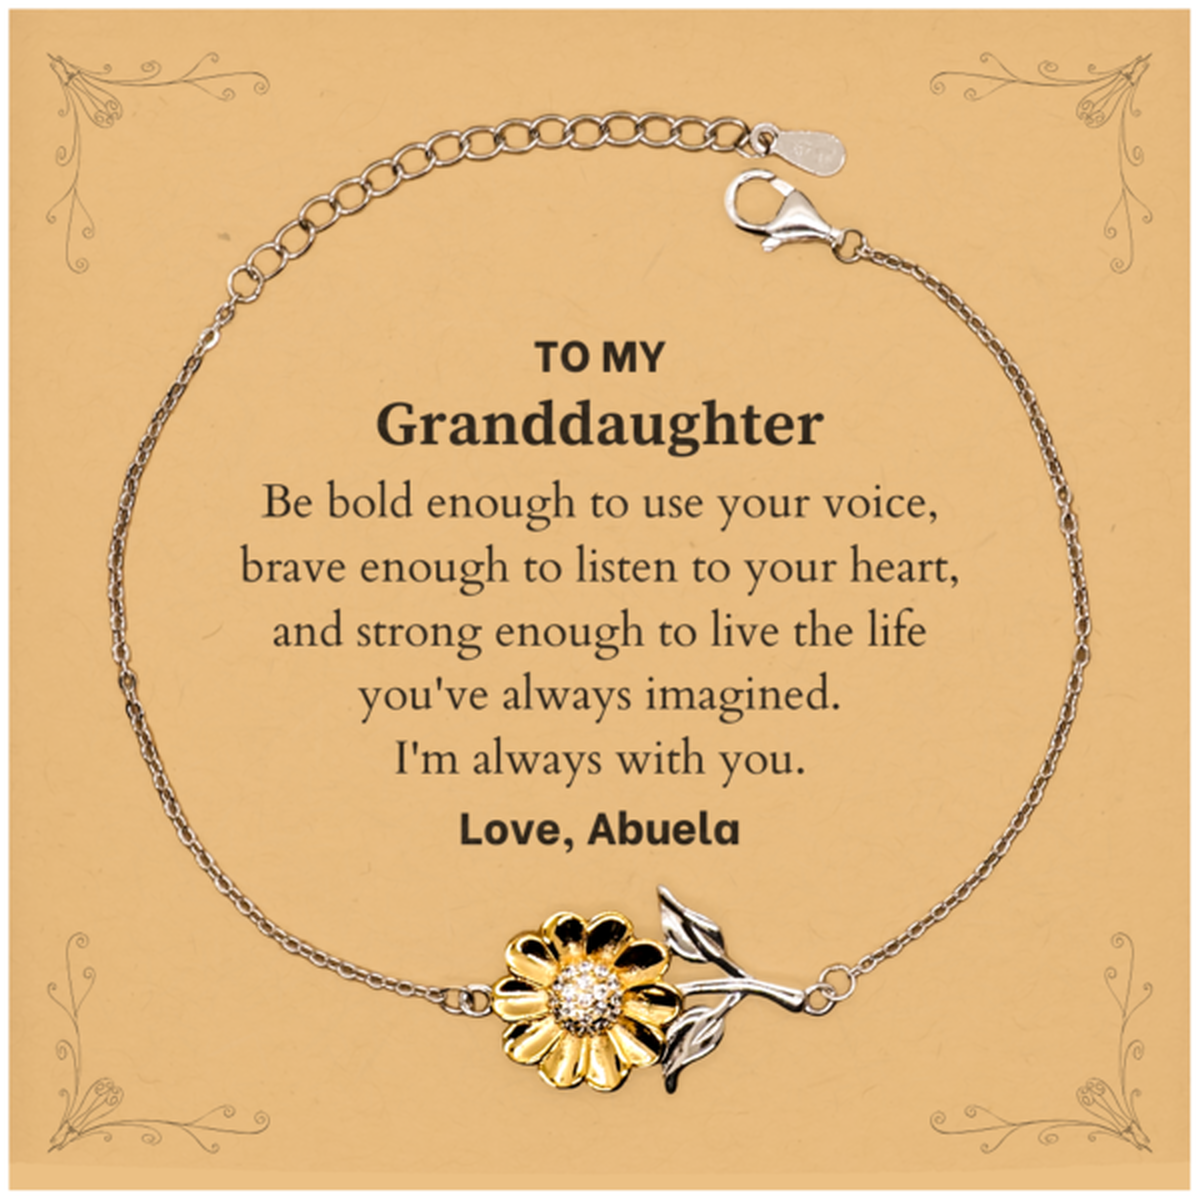 Keepsake Granddaughter Sunflower Bracelet Gift Idea Graduation Christmas Birthday Granddaughter from Abuela, Granddaughter Be bold enough to use your voice, brave enough to listen to your heart. Love, Abuela